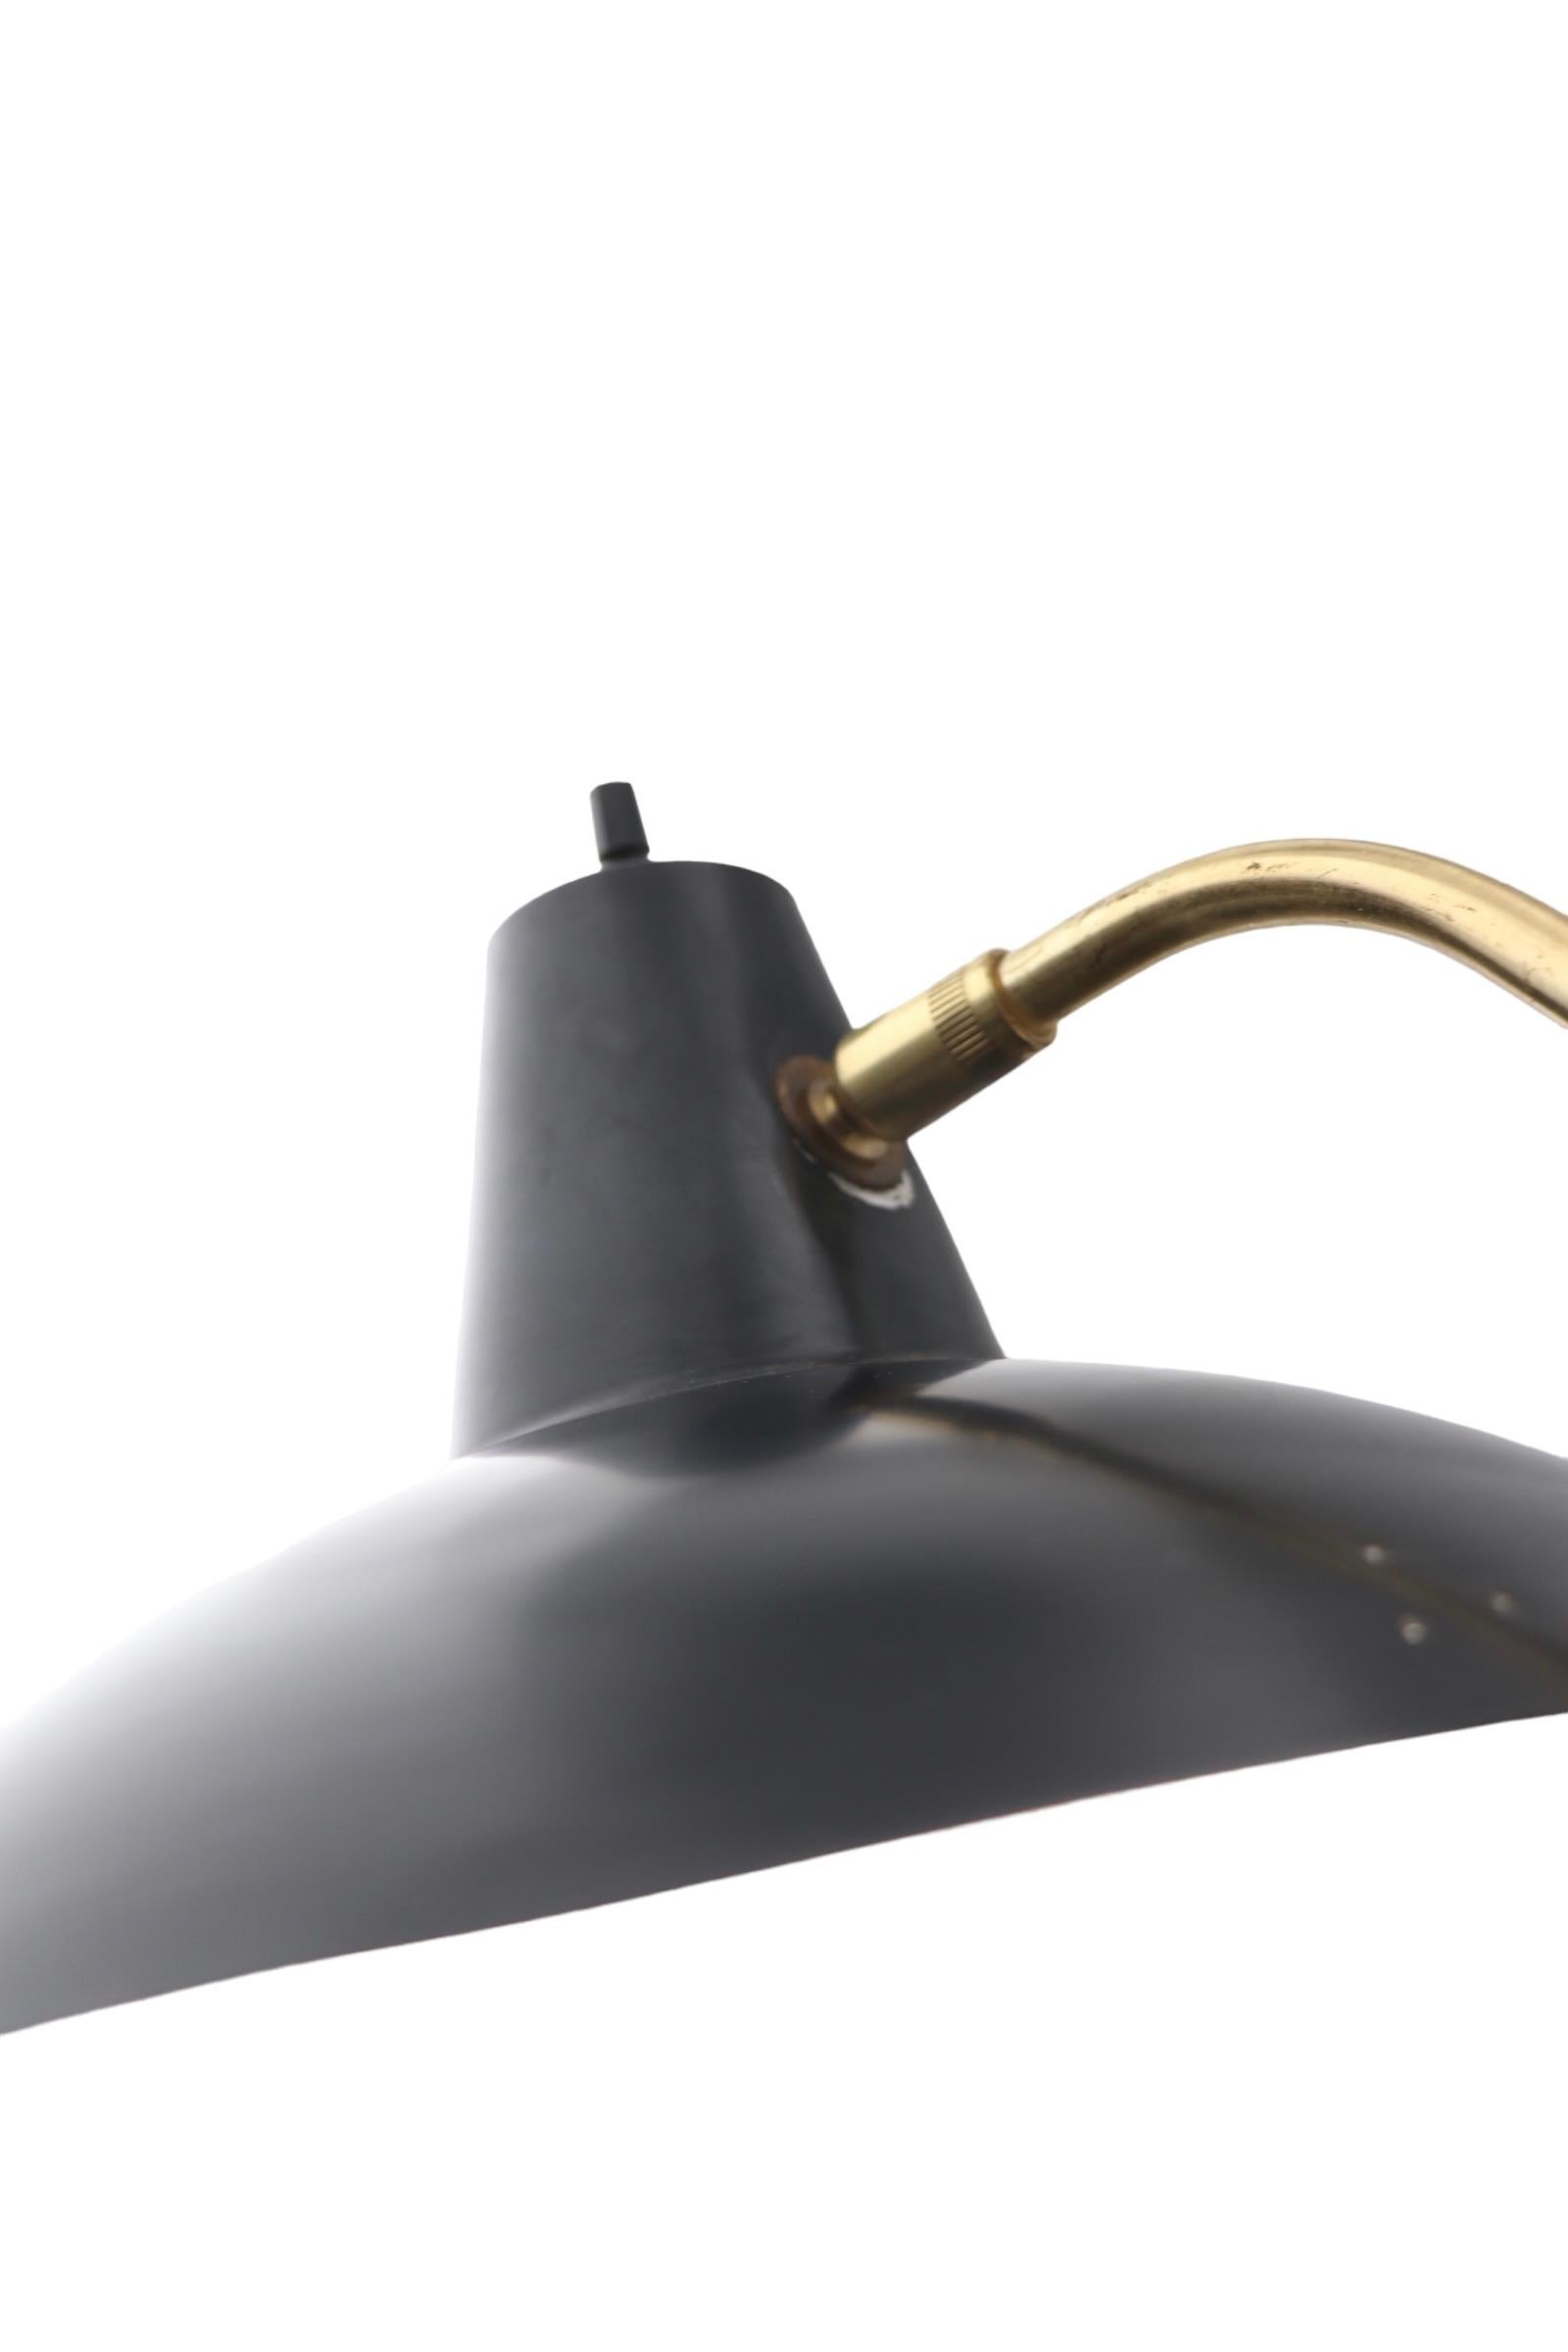 Stylish architectural scissor, accordion arm wall sconce having a black metal frame and shade, with brass elements. This example is in very good, clean, original, working and ready to install  condition. Design attributed to Gerald Thurston,